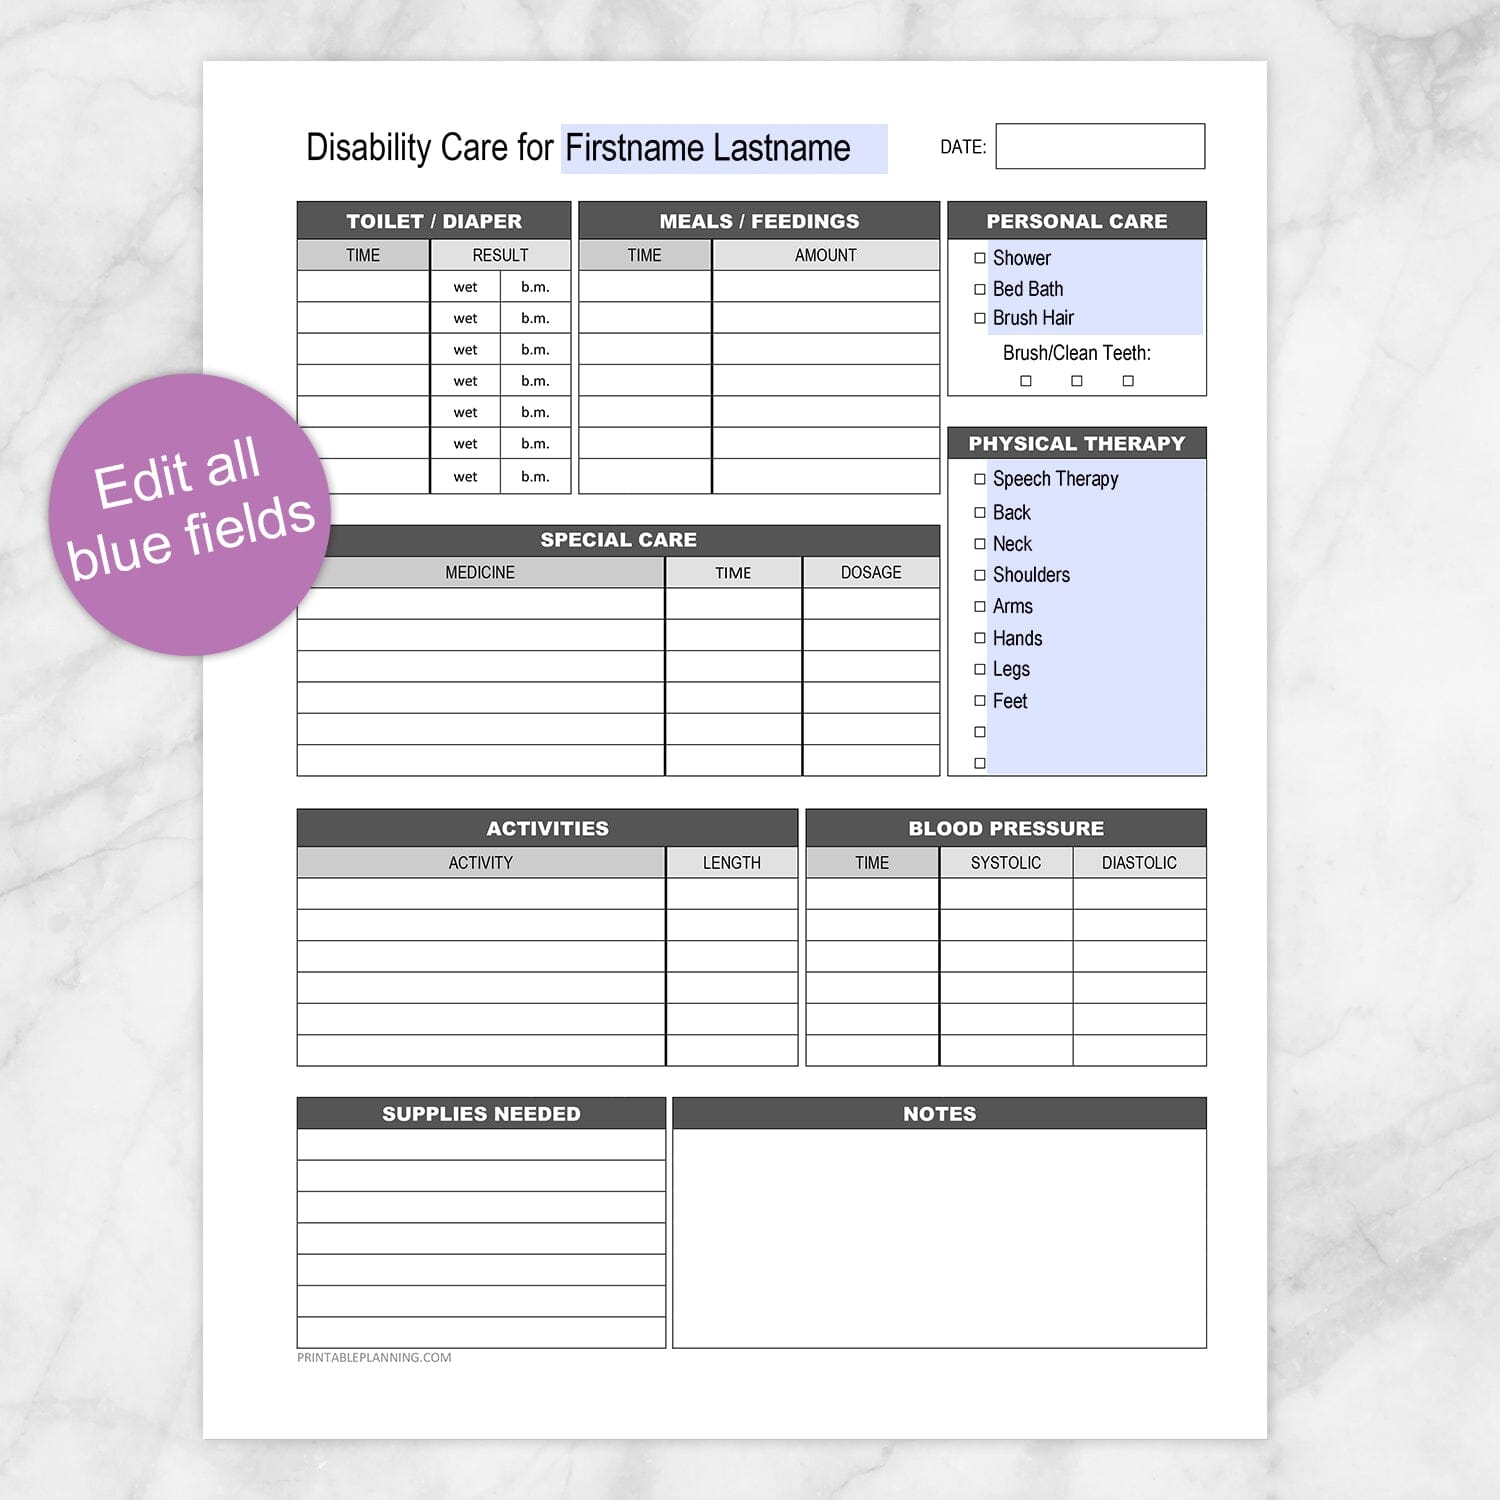 Printable Disability Care, Daily Care Sheet at Printable Planning. Edit all blue fields.